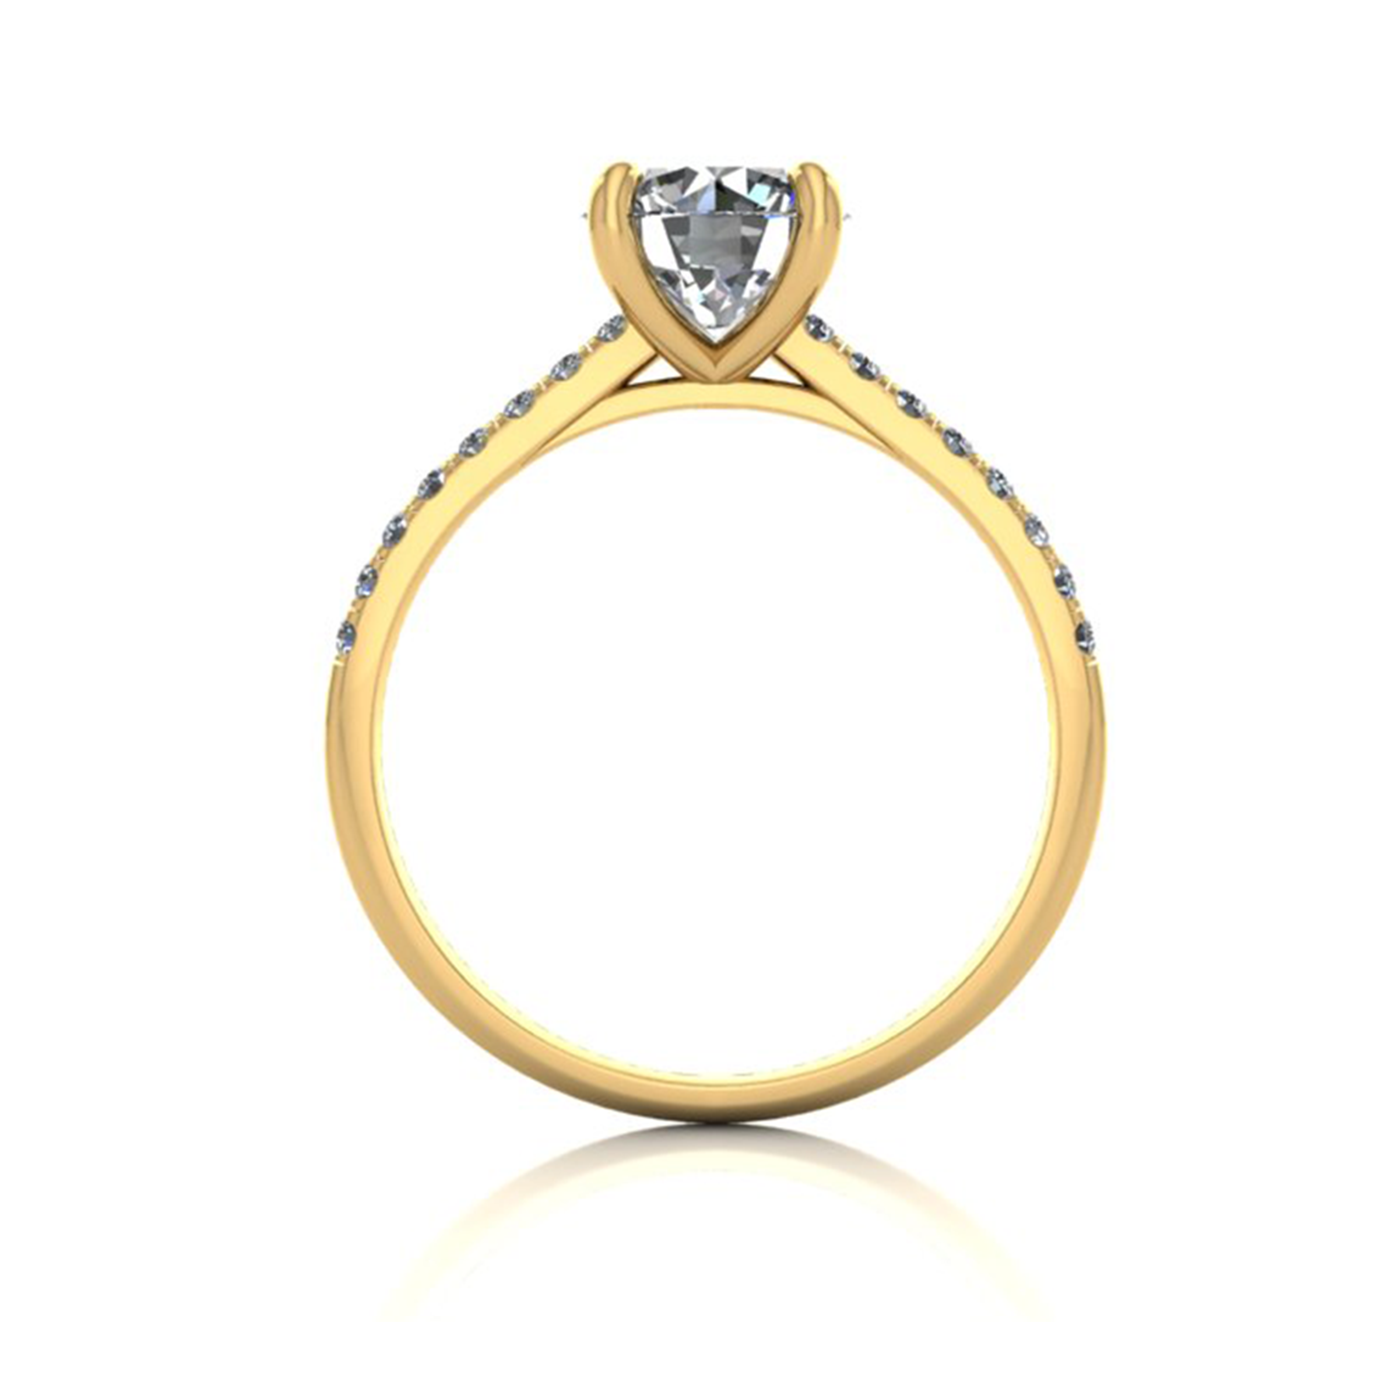 18k yellow gold 1.2ct 4 prongs round cut diamond engagement ring with whisper thin pavÉ set band